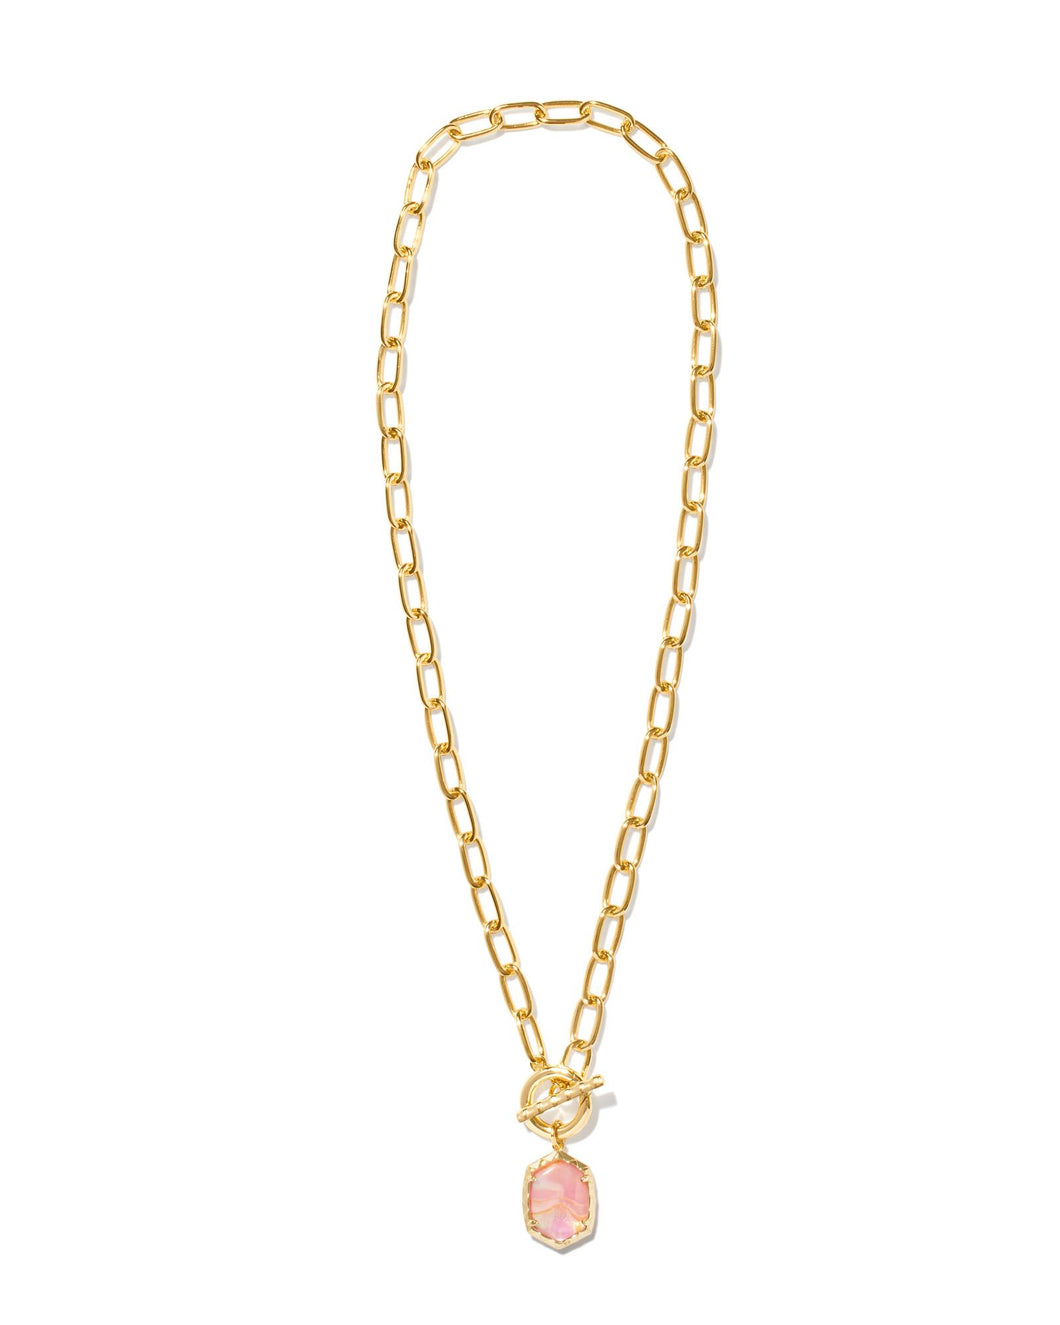 Daphne Gold Link and Chain Necklace in Light Pink Iridescent Abalone